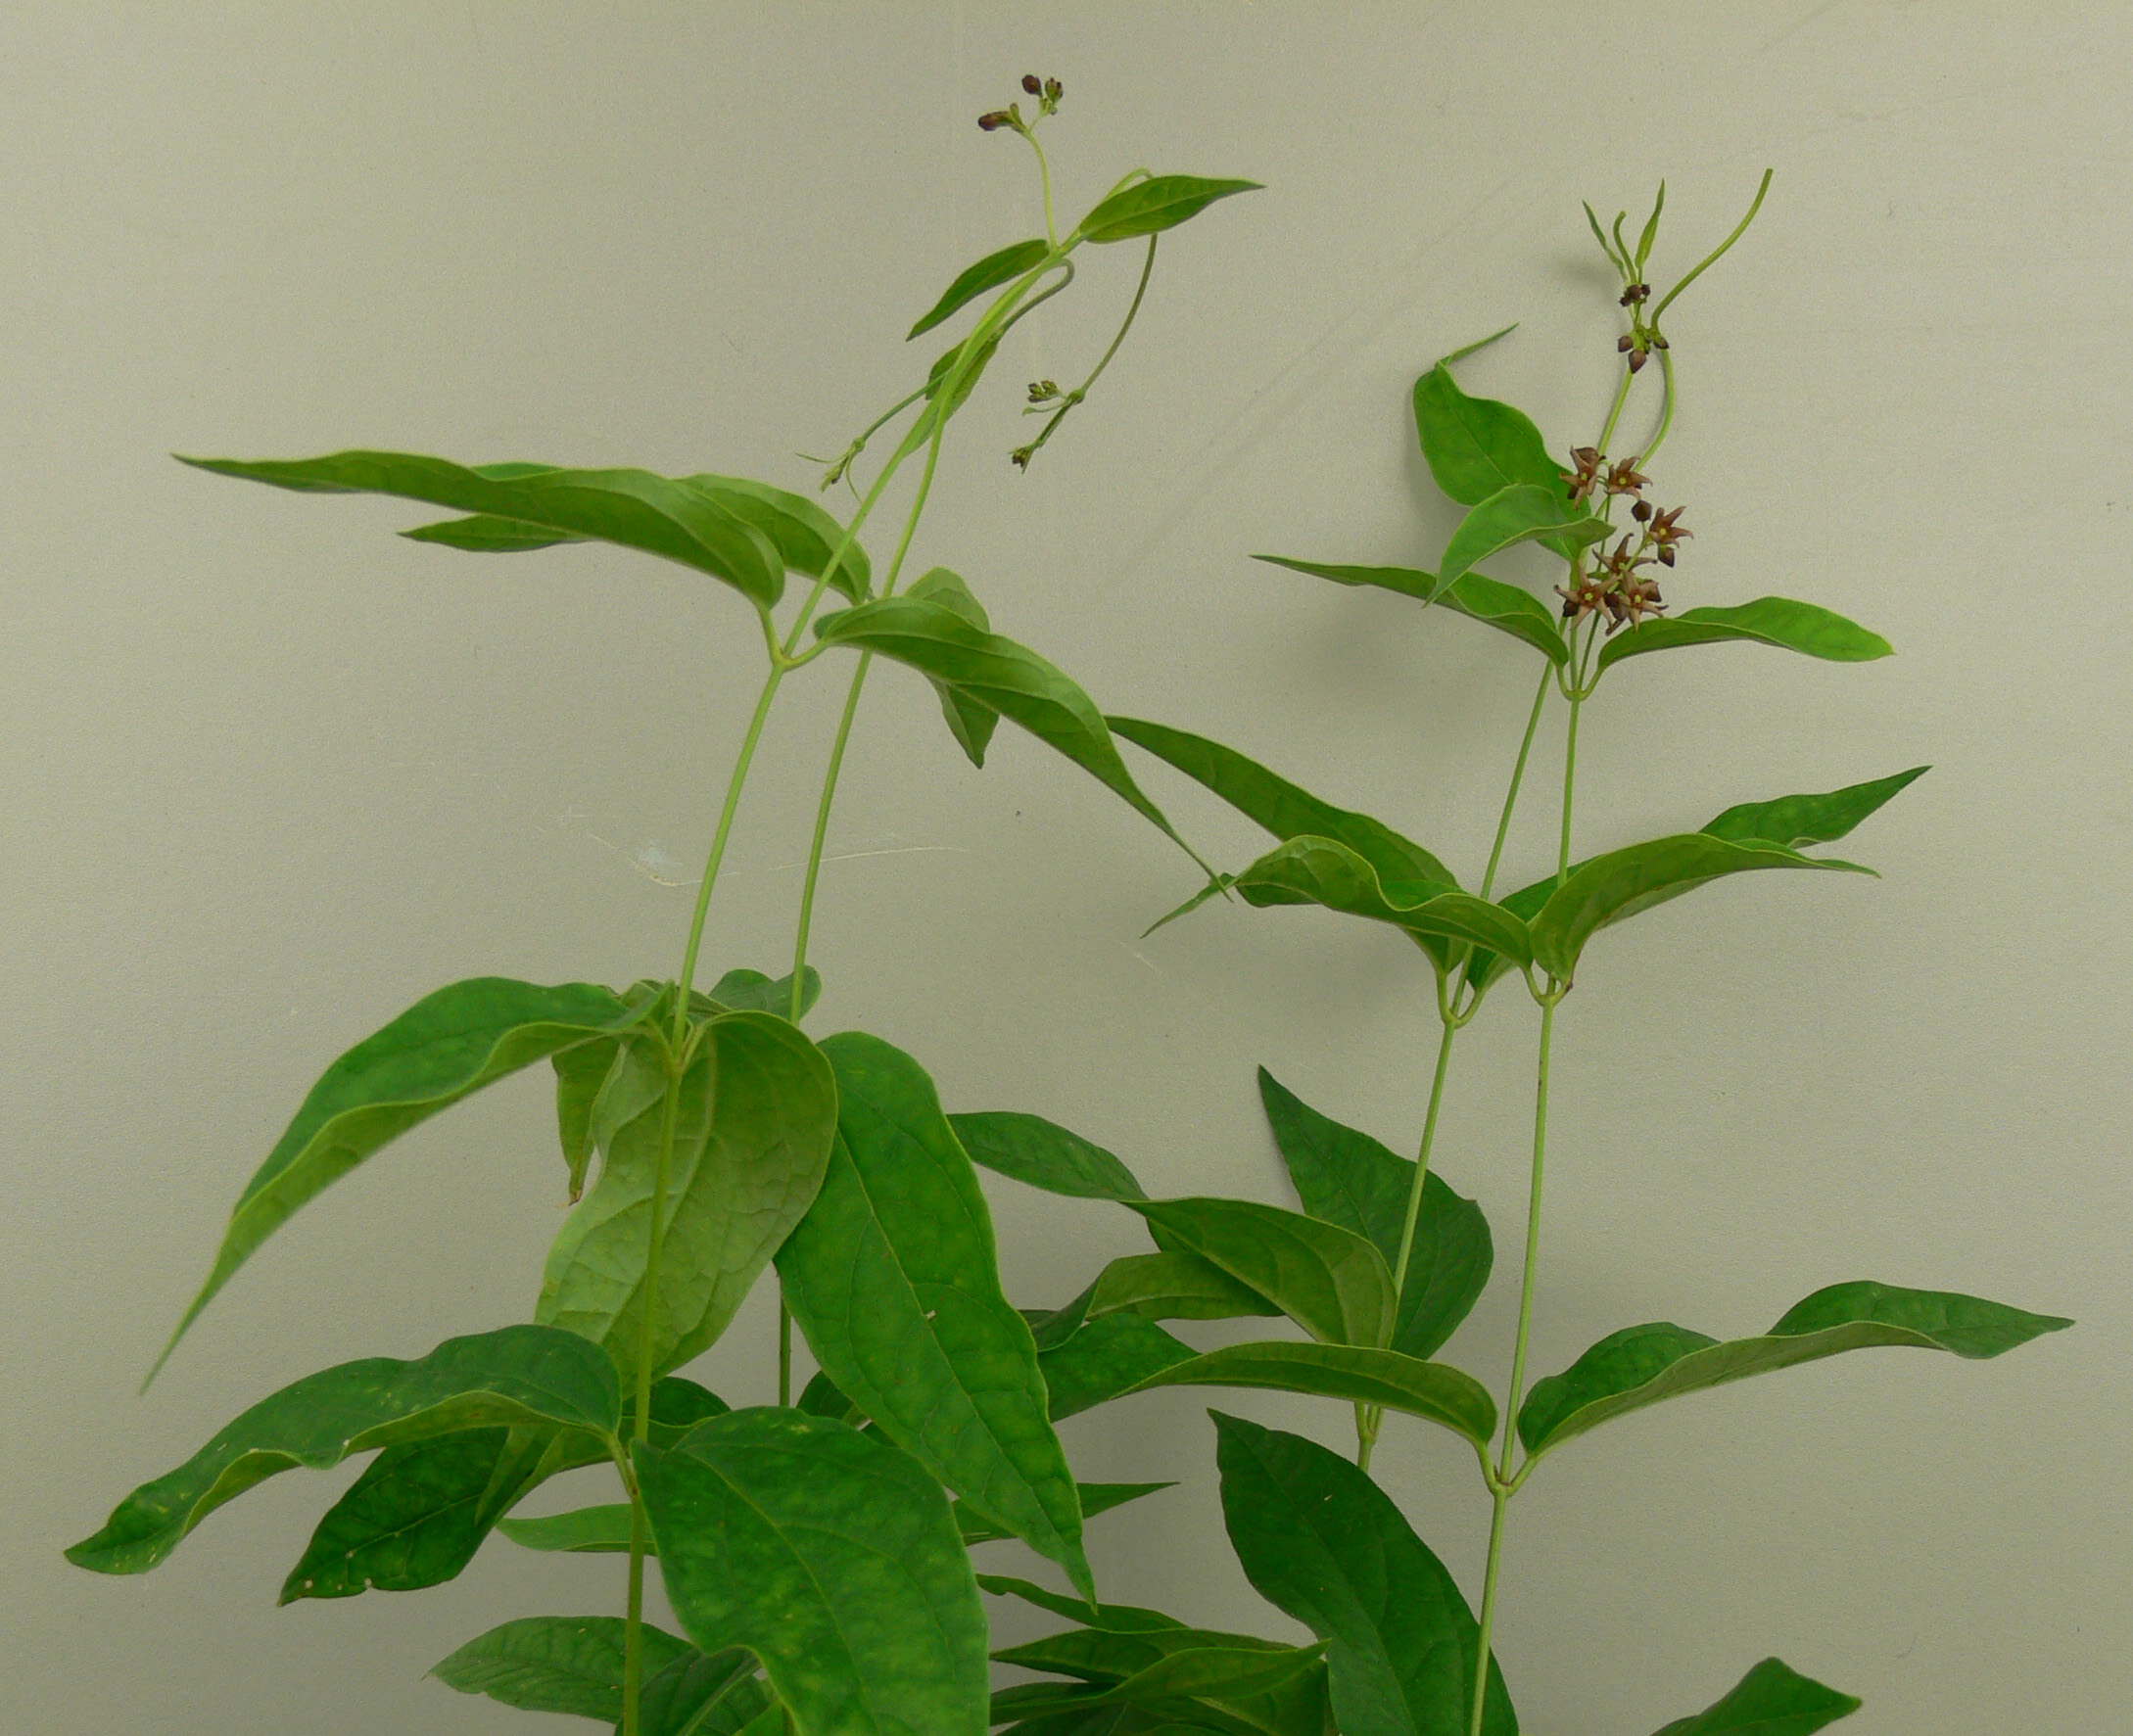 A flowering plant and opposite leaf orientation